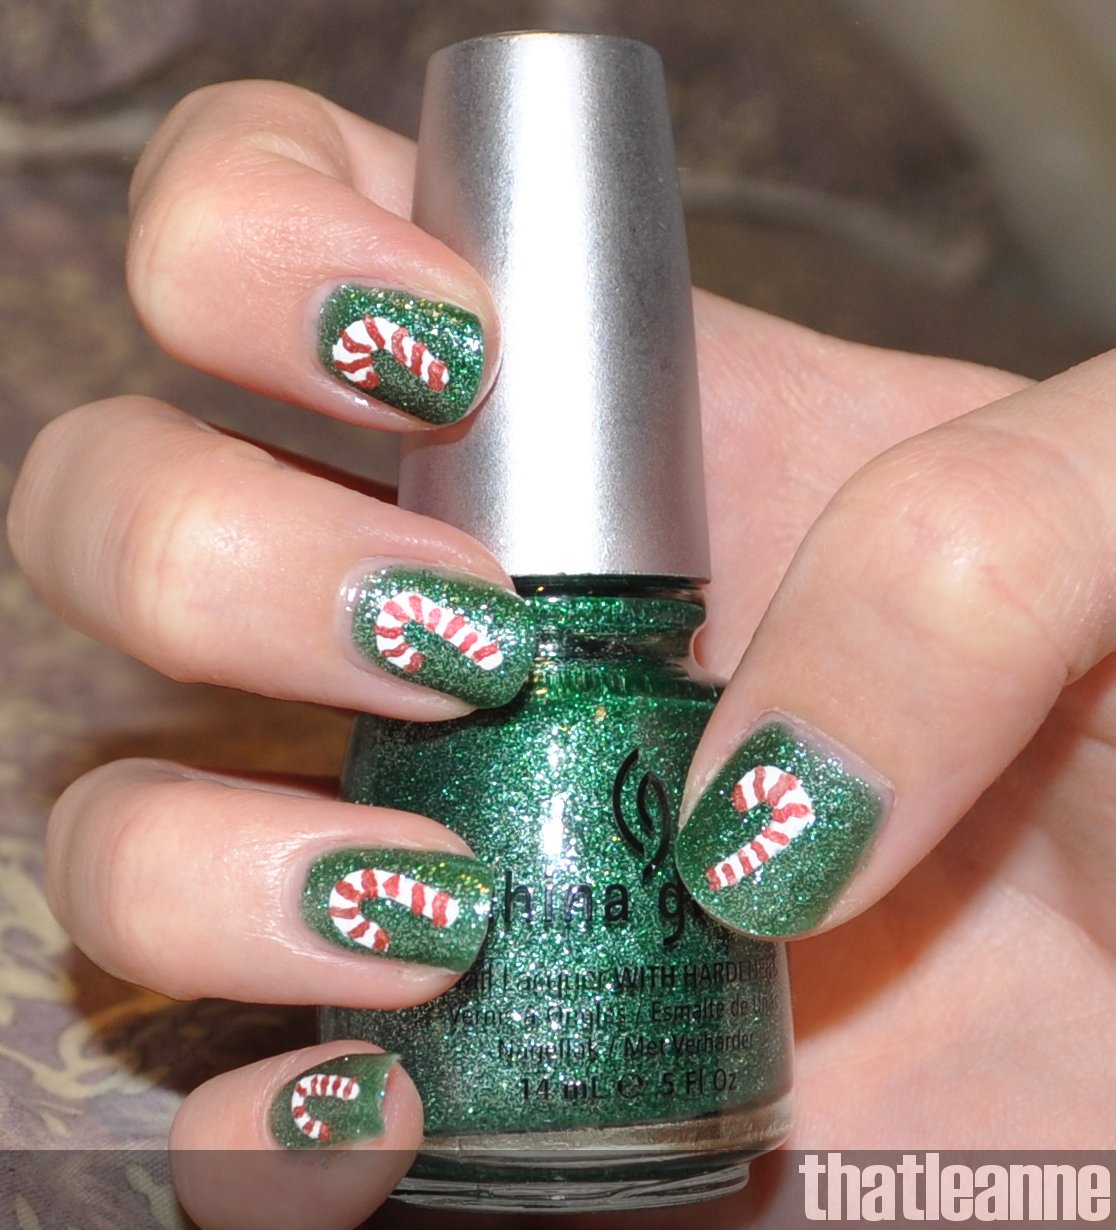 thatleanne: China Glaze Holiday 2010 Glitter swatches and Candy Cane nails!